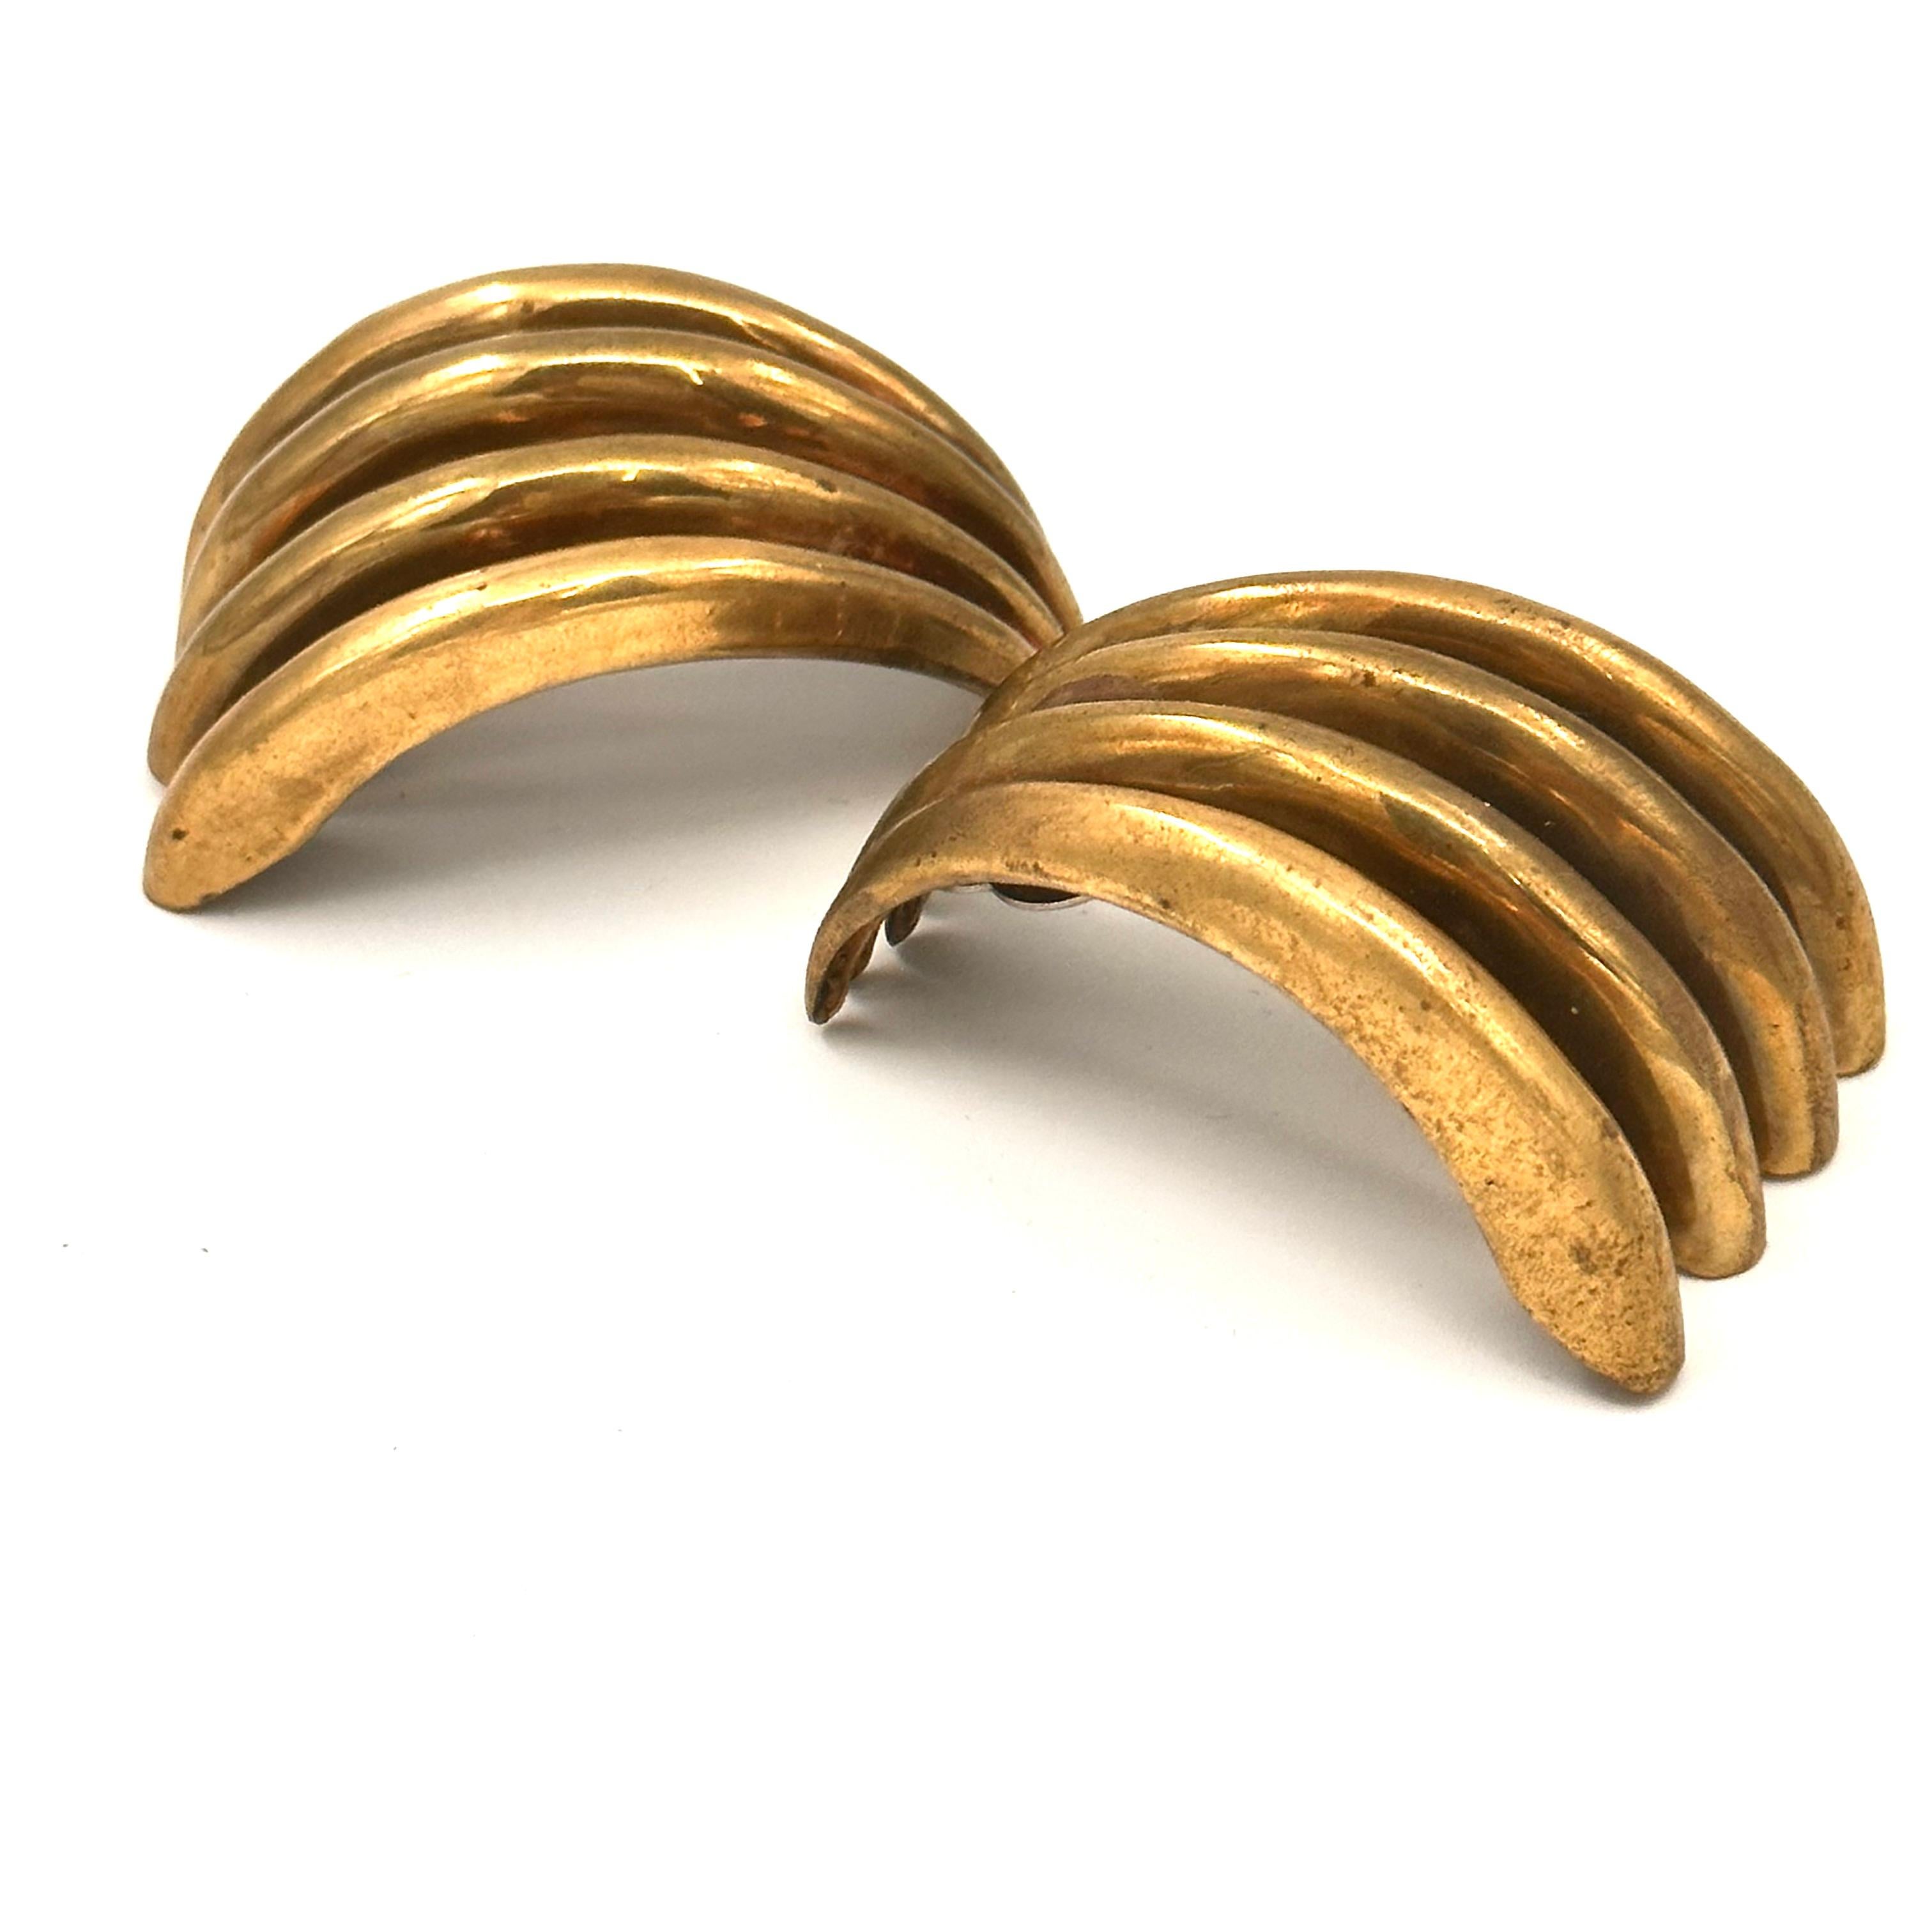 This bold and sculptural clip on earring is an example of the big scale jewelry Robert Lee Morris and Donna Karan created for furnished the runway. These are a warm burnished brass, hollow rib forms so still light enough to wear. Bold Dynamic